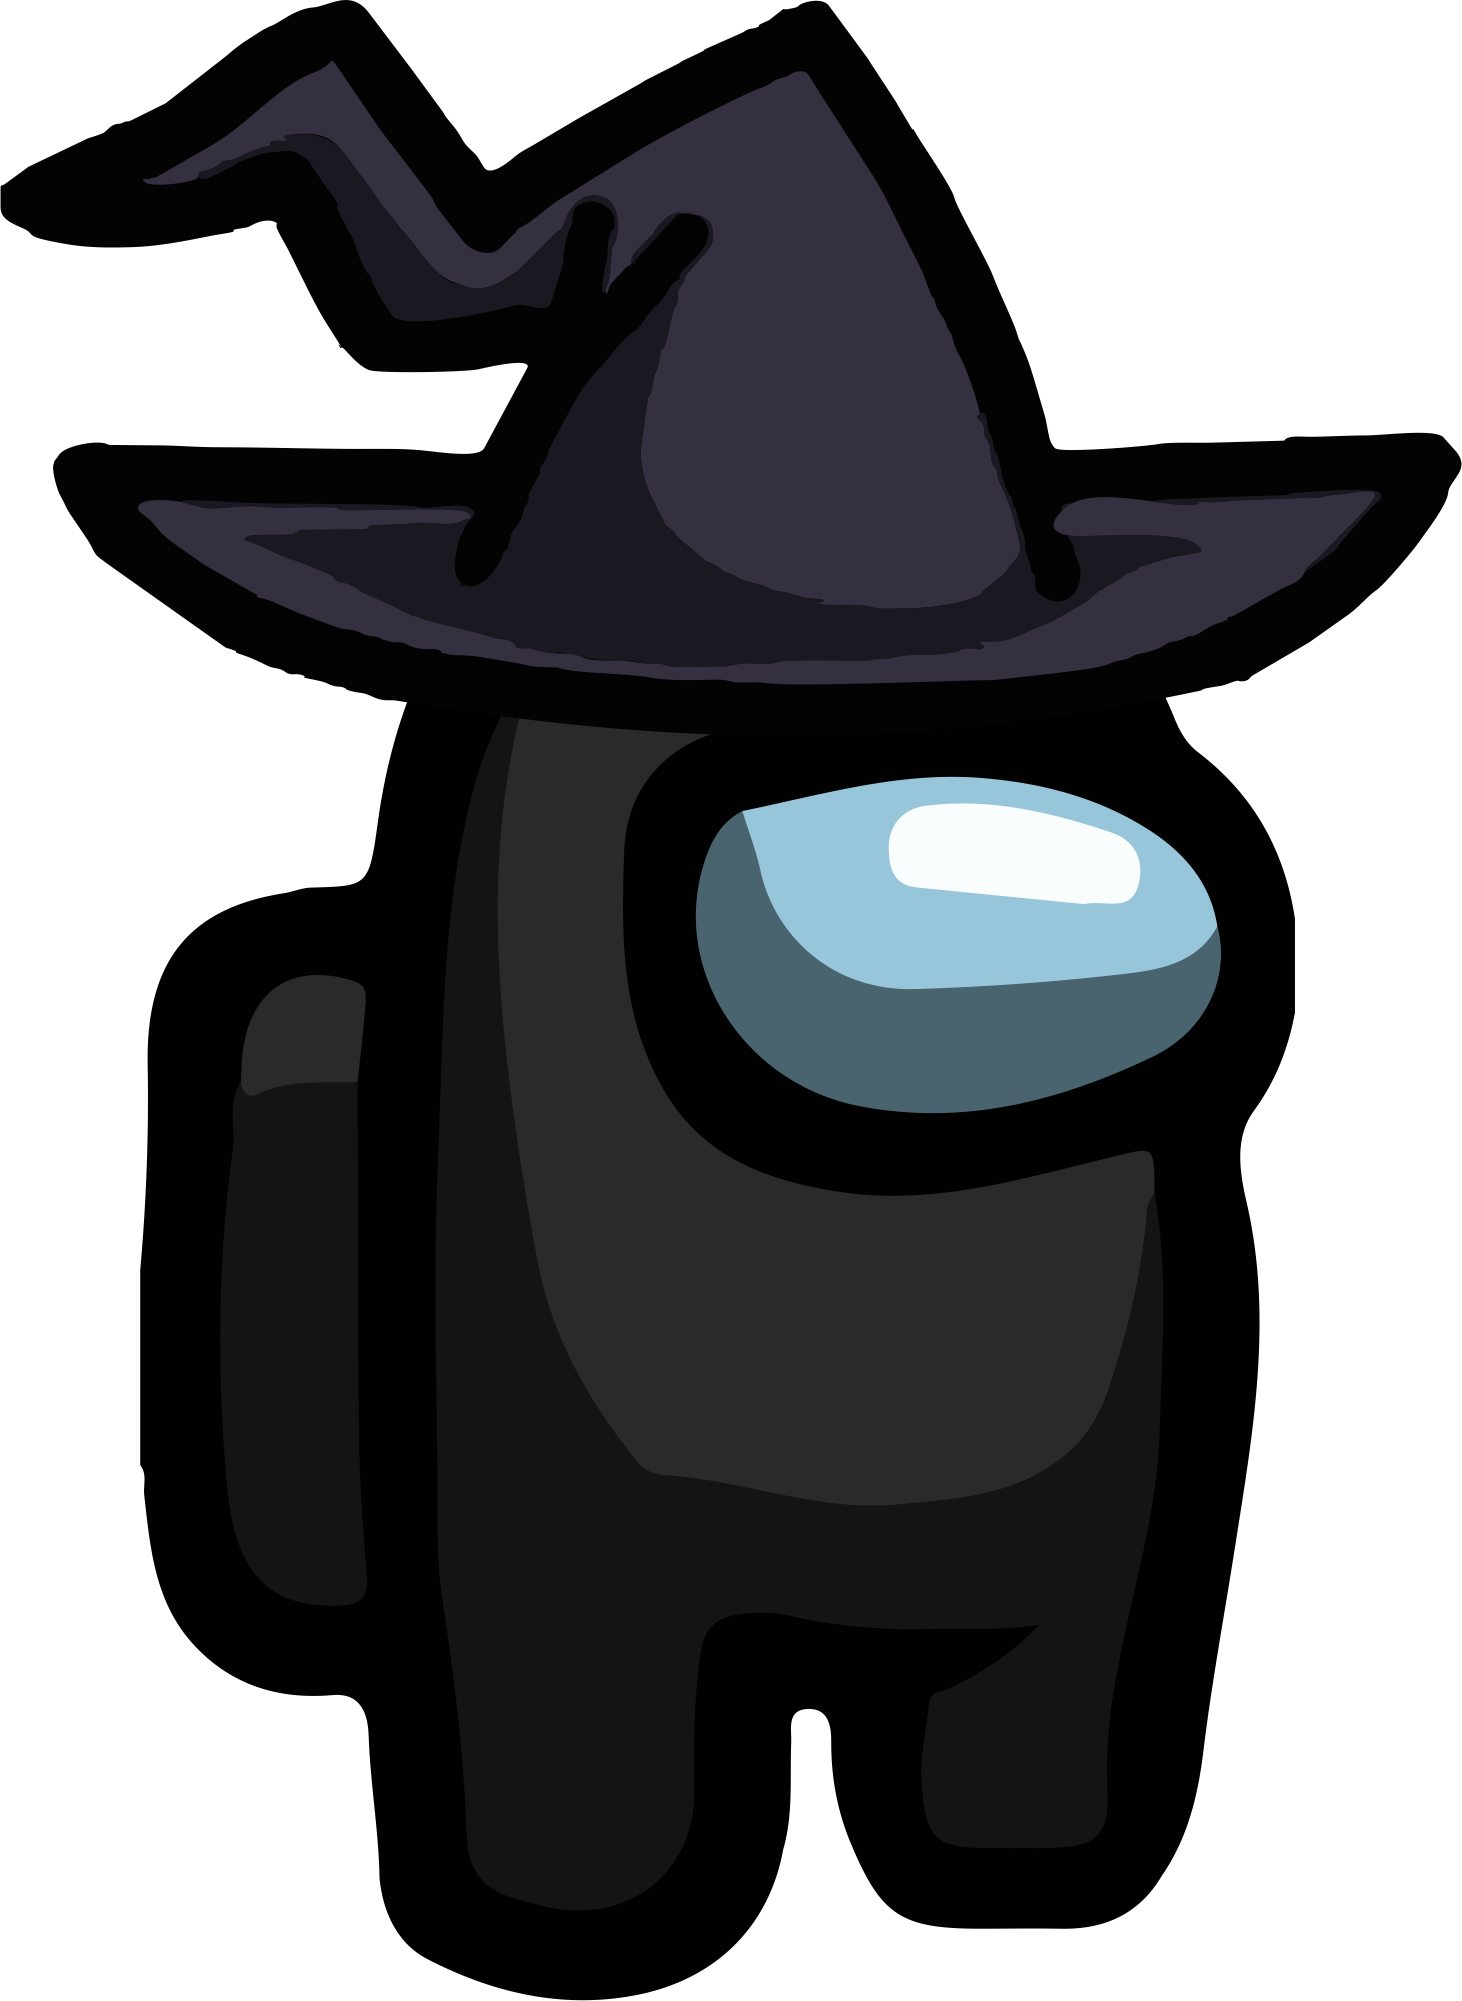 among-us-black-witch-hat-png-01